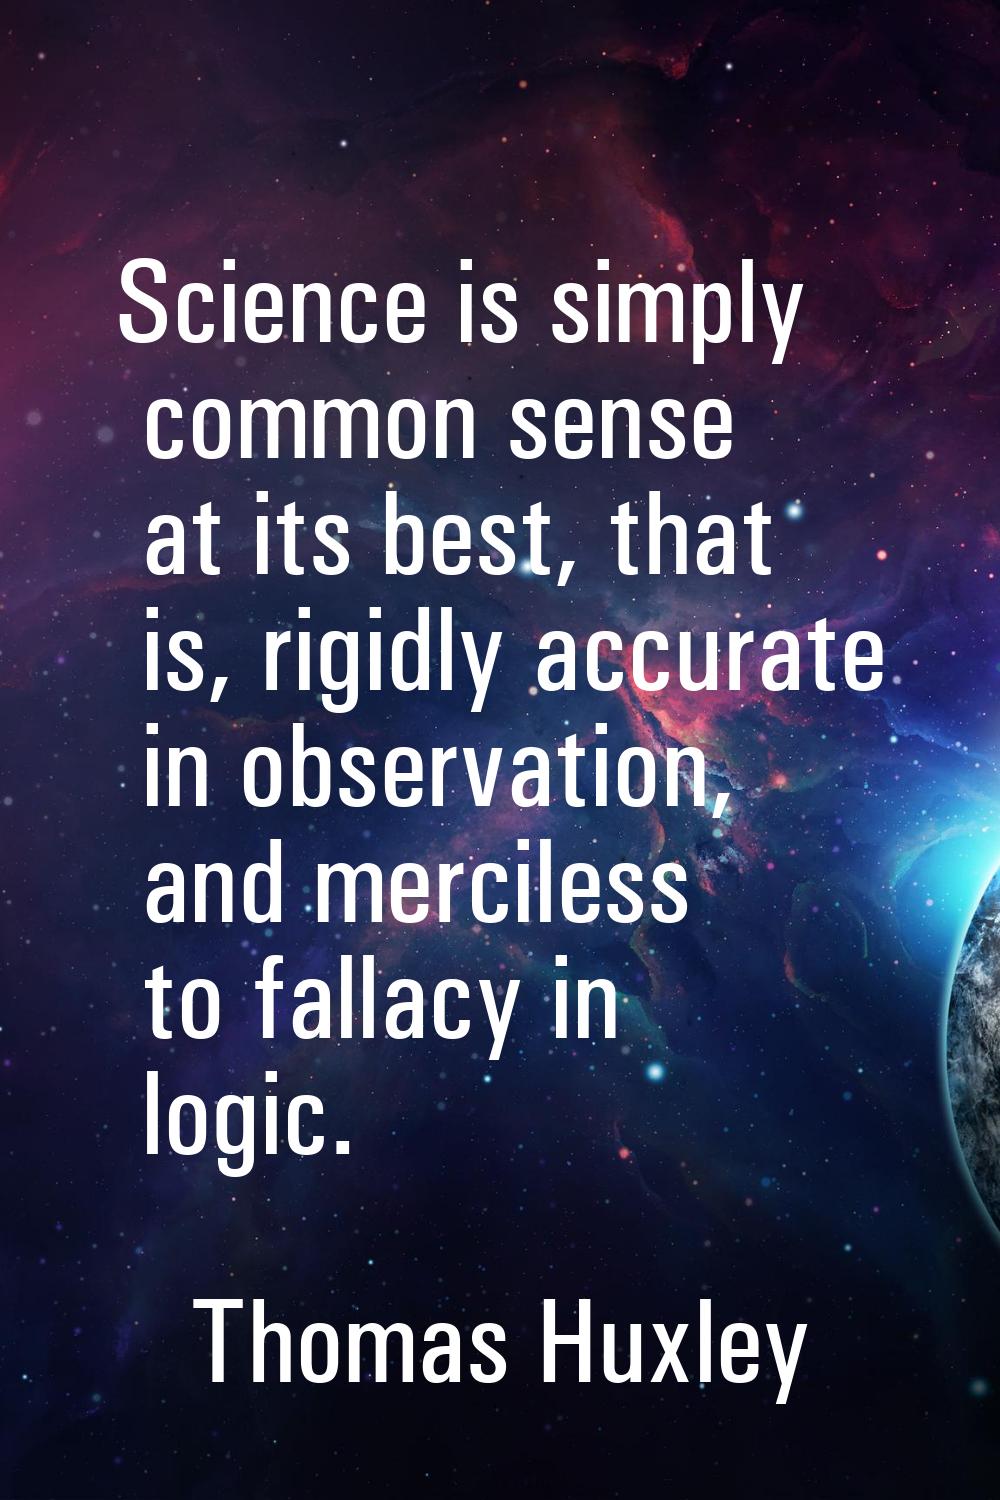 Science is simply common sense at its best, that is, rigidly accurate in observation, and merciless